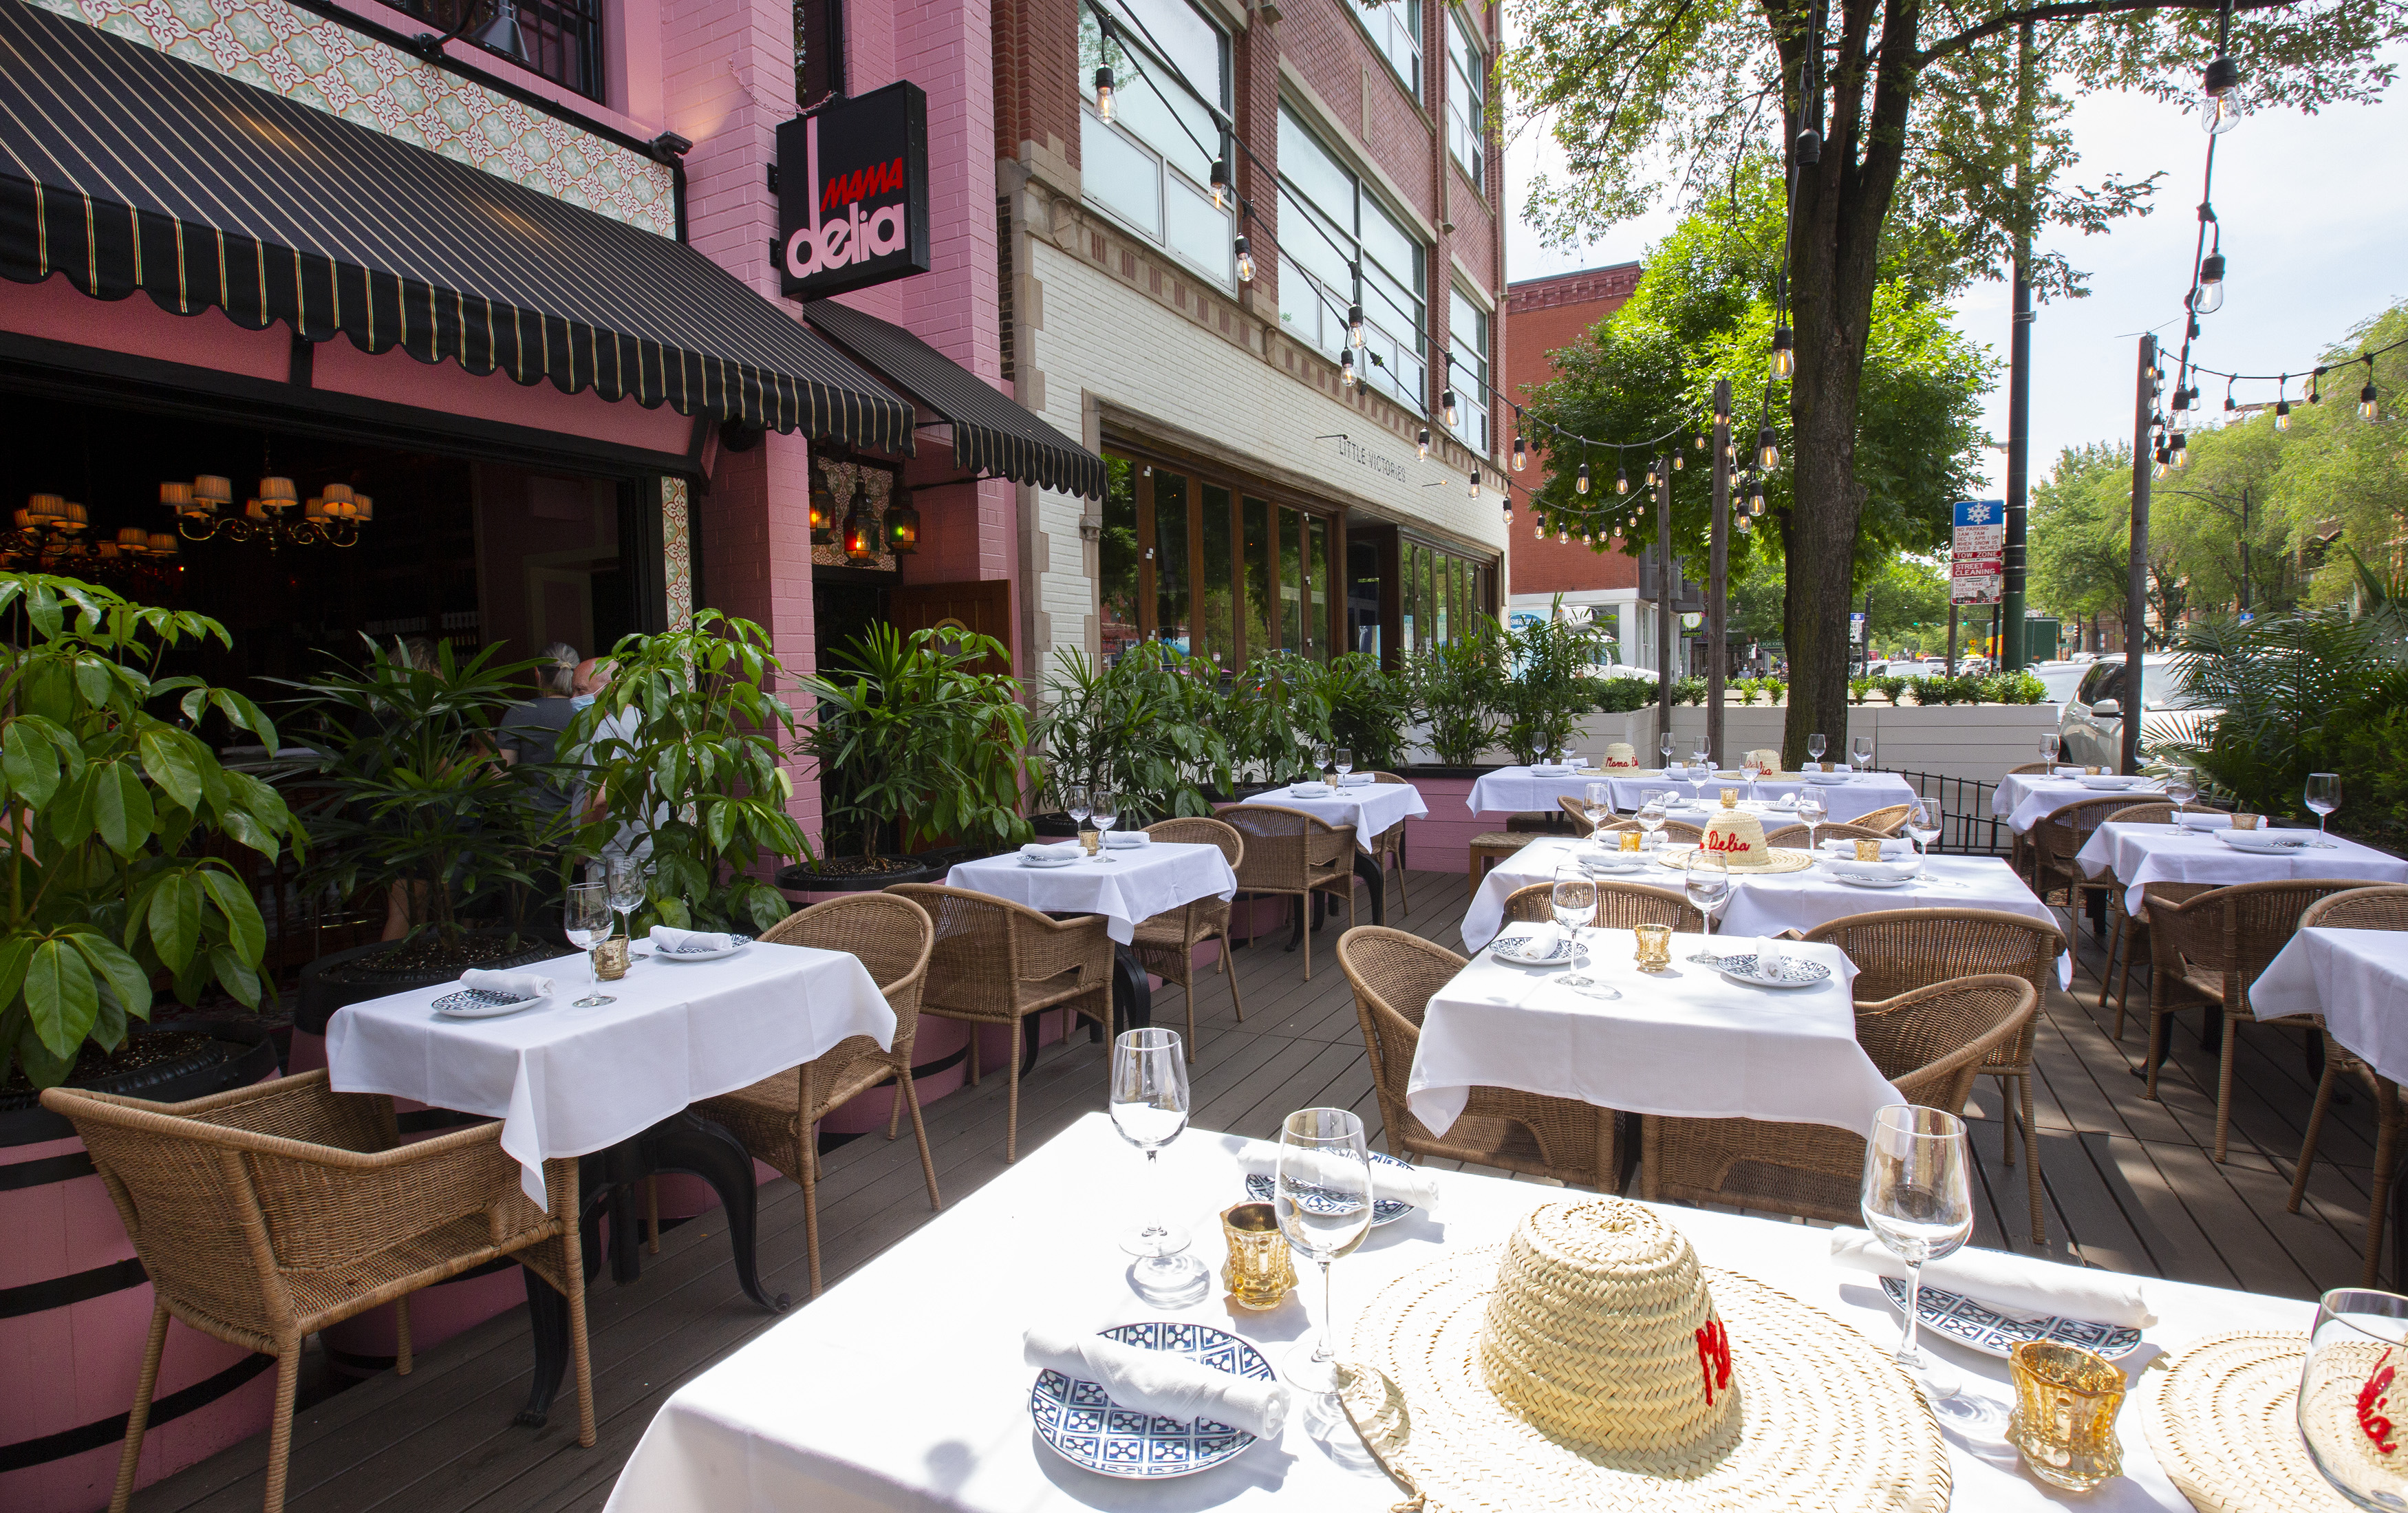 A large outdoor patio for dining next to a pink building.